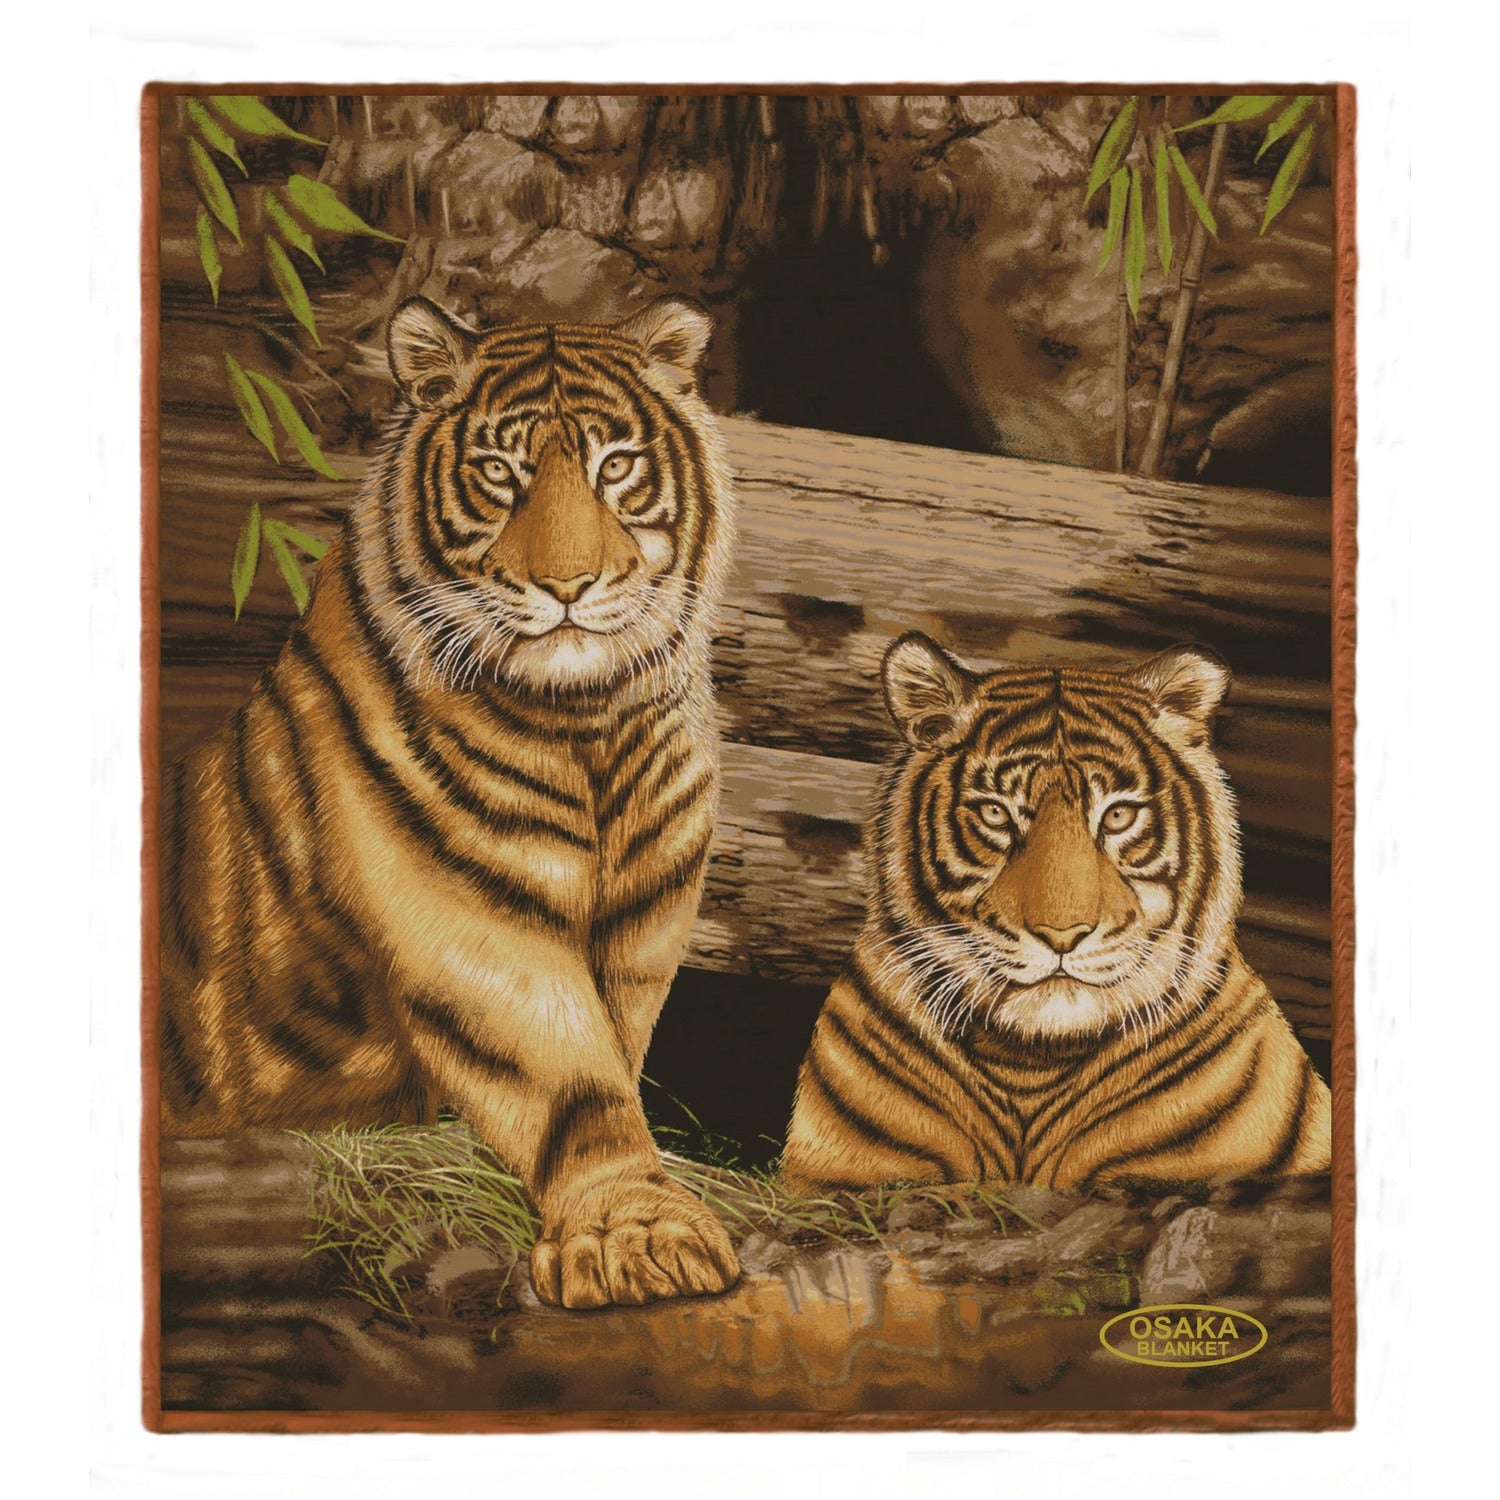 TIGER REVERSIBLE DESIGN 2PLY HEAVY DUTY WEIGHTED BEDDING BLANKETS - MICROFIBER FABRIC, FADE RESISTANT, SUPER SOFT, BED IN A BAG